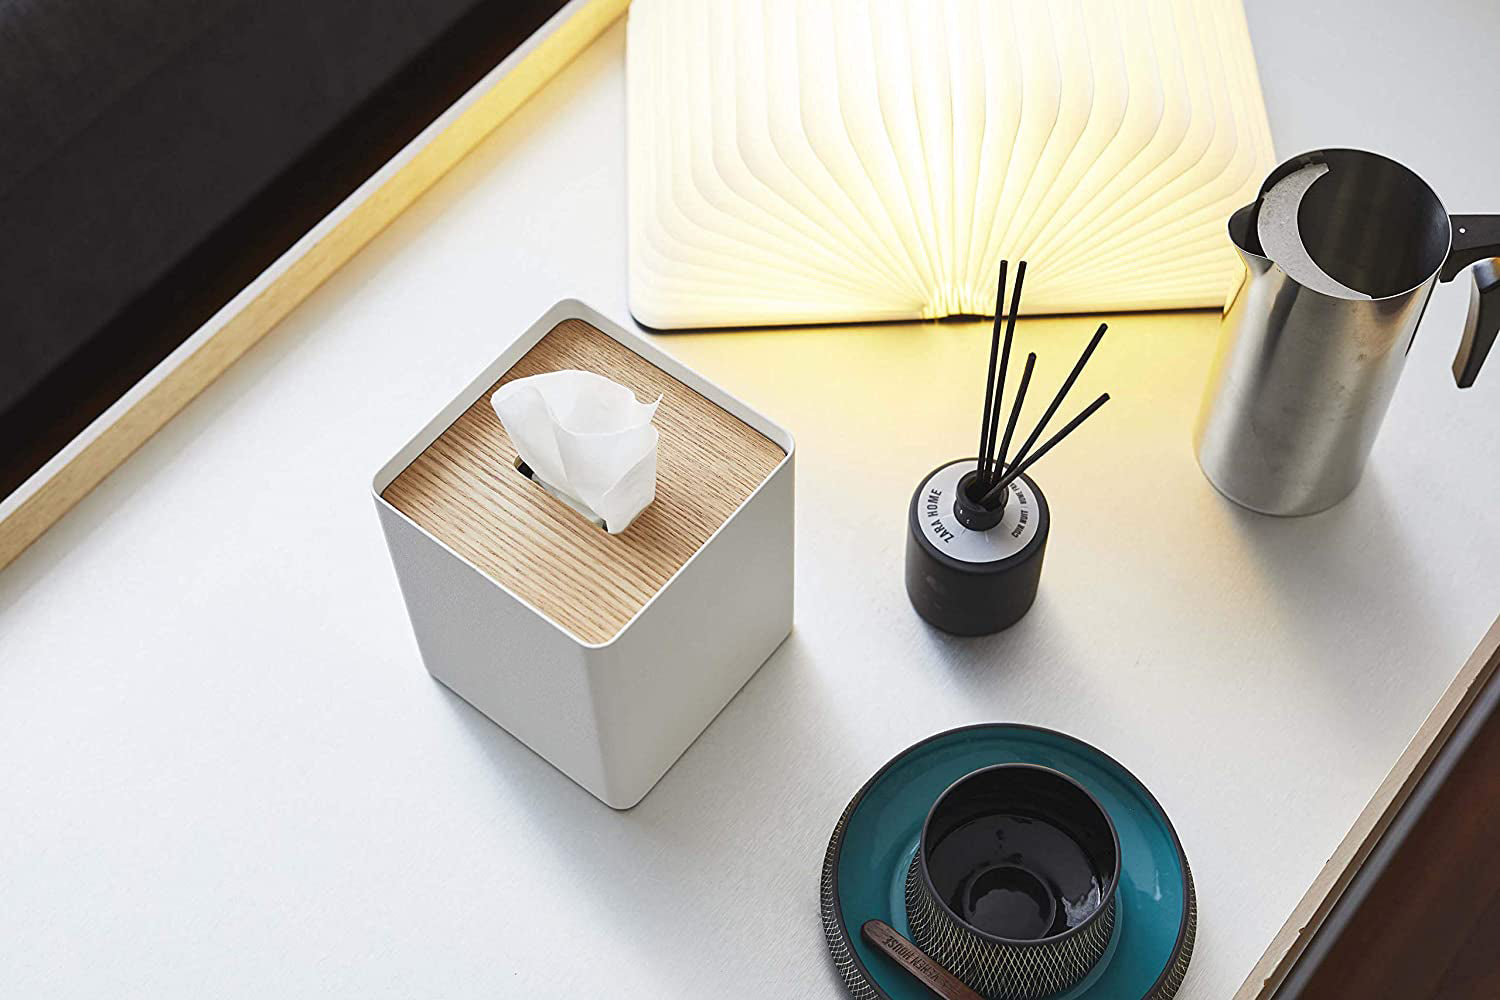 View 6 - Aerial view of white Tissue Case on table next to book light, cup, and décor pieces by Yamazaki Home.